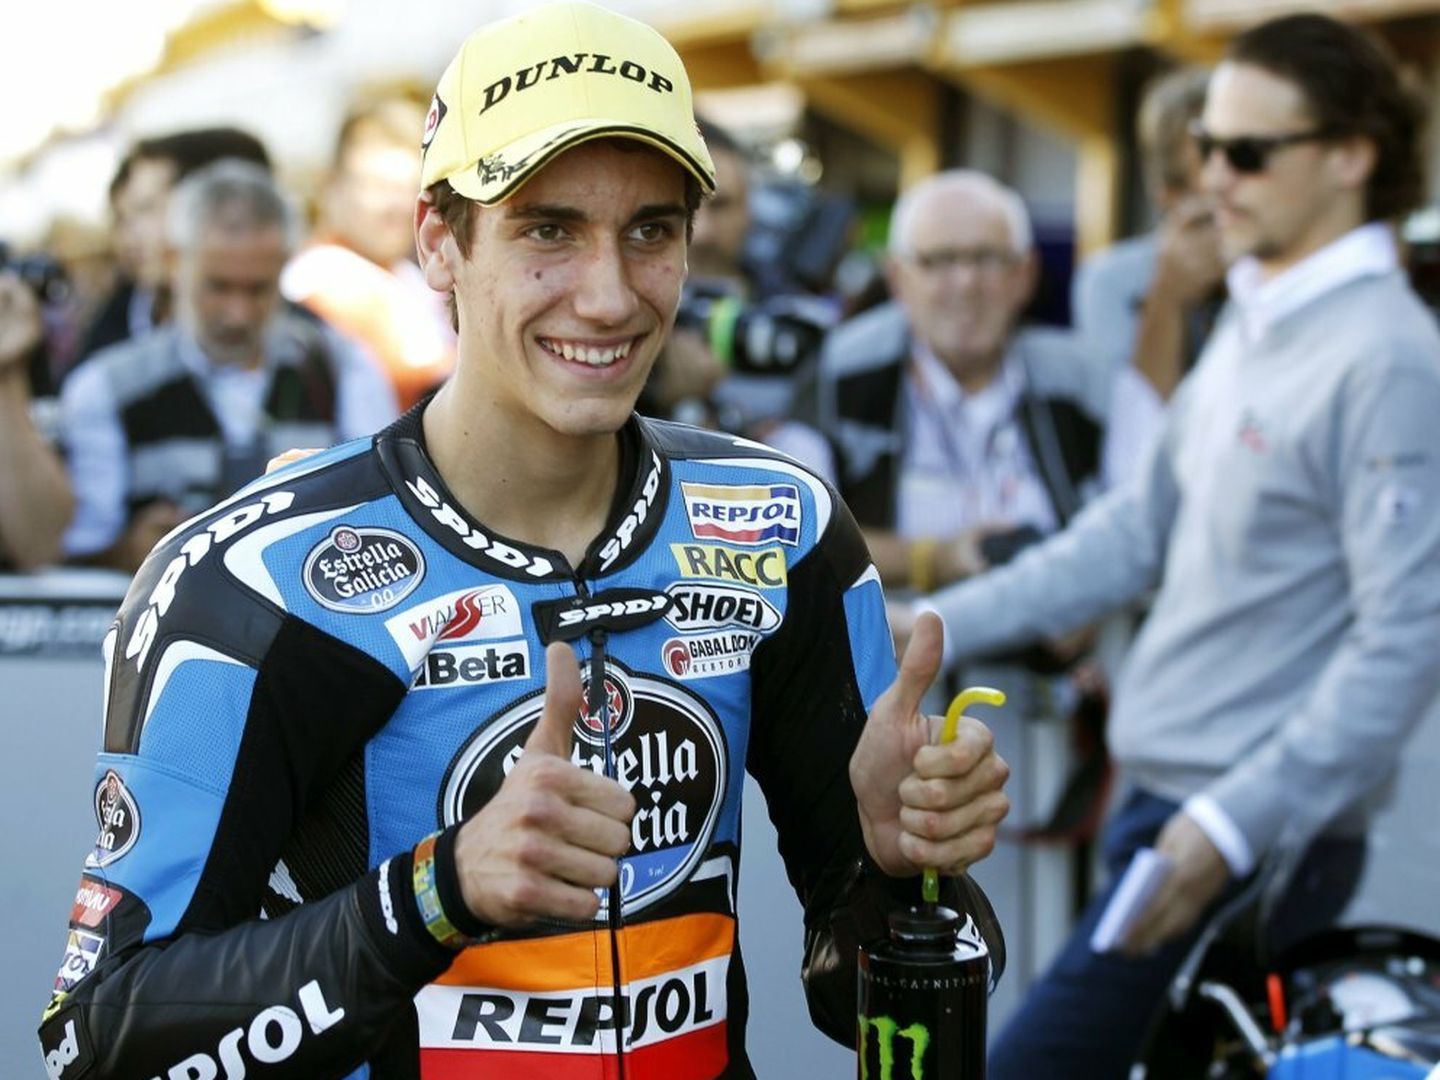 Ktm moto3 rider alex rins of spain gives thumbs-up after taking pole position ahead of the valencia motorcycle grand prix at the ricardo tormo racetrack in cheste